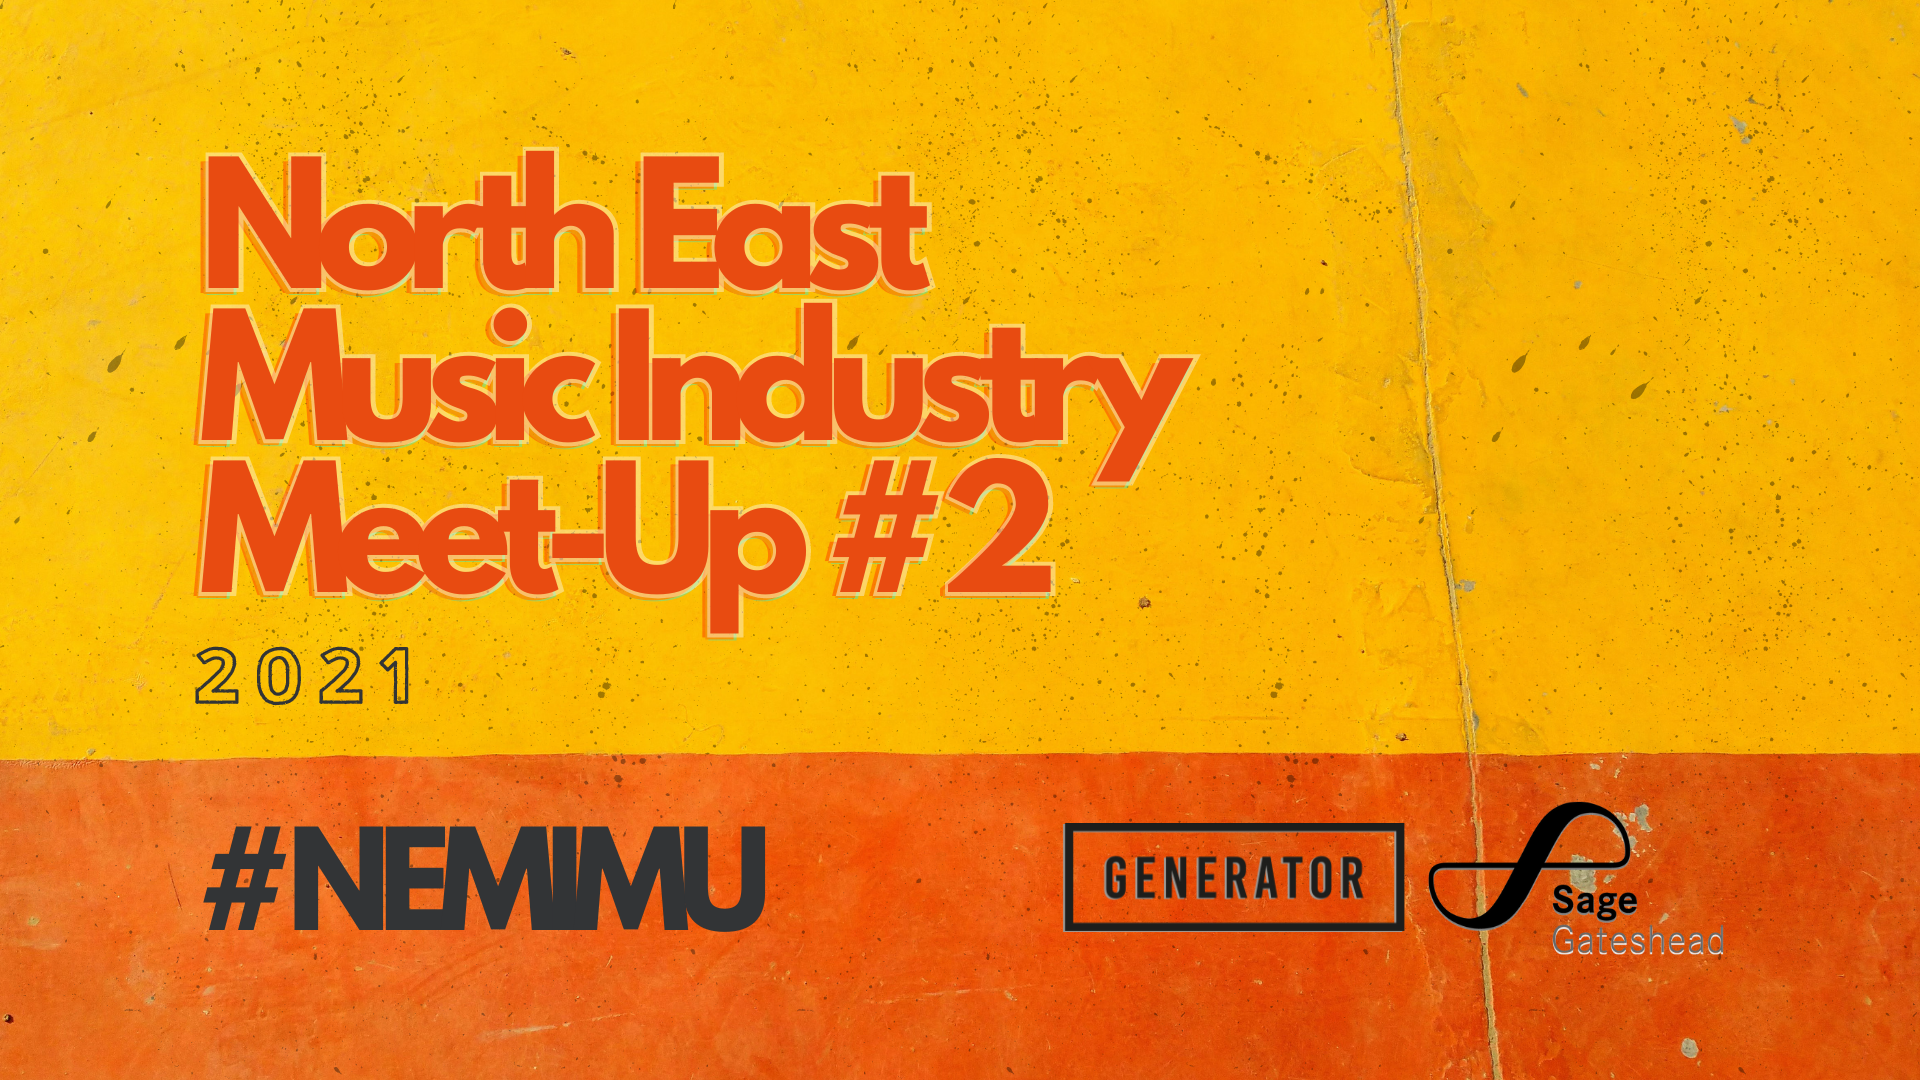 https://generator.org.uk/wp-content/uploads/2021/05/North-East-Music-Industry-Meet-Up-2021-facebook-event.png